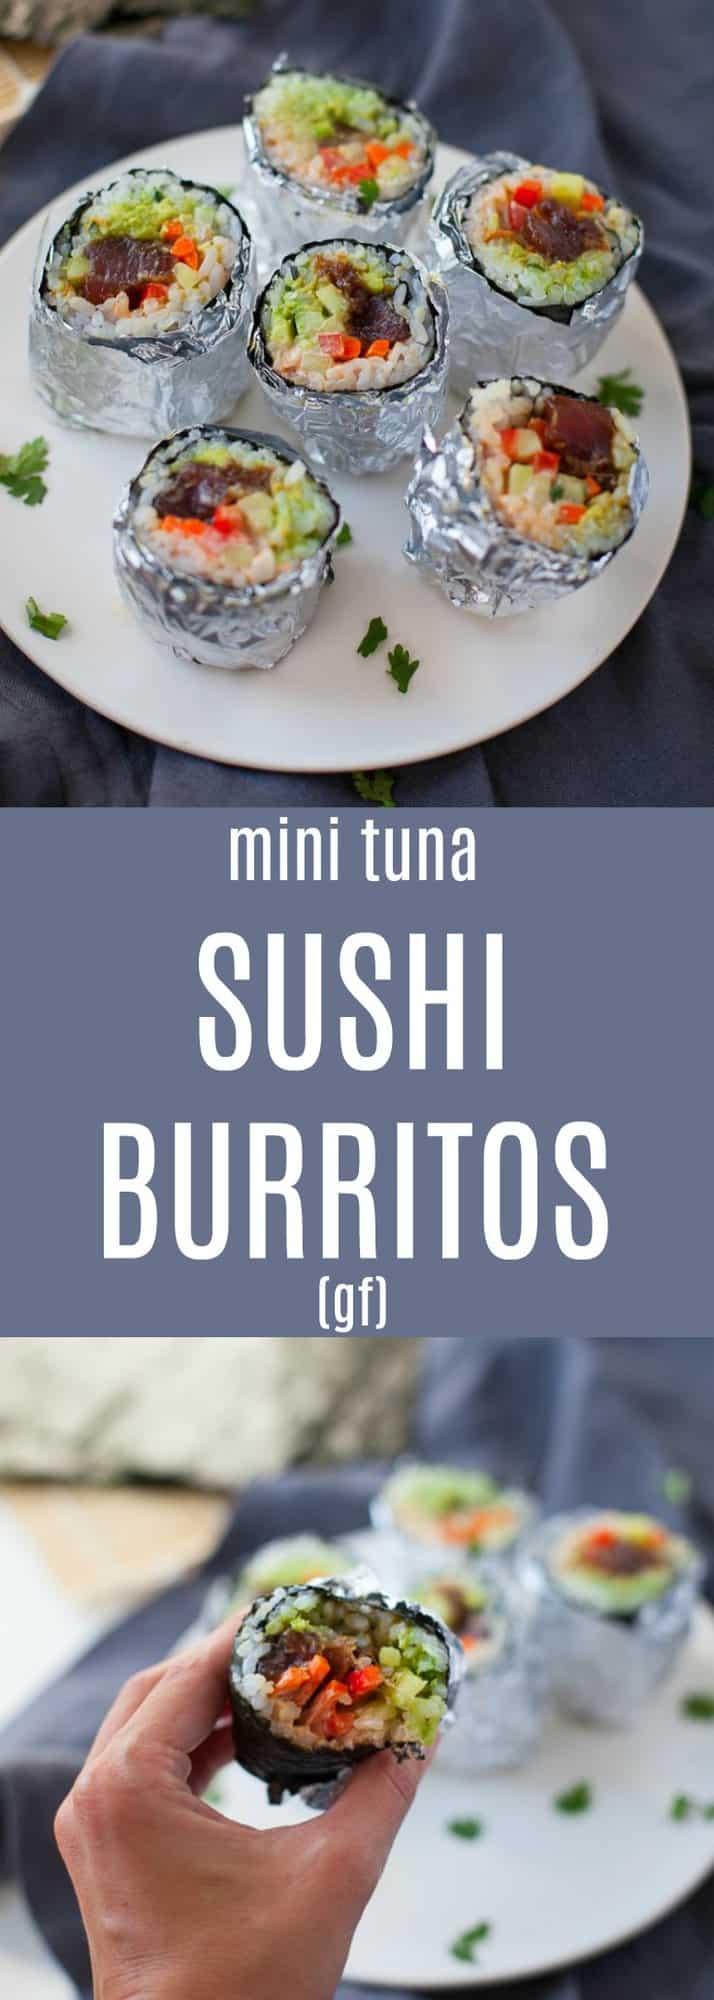 These mini tuna sushi burritos are the cutest appetizers to serve at your next get-together! Not to mention, they’re pretty delicious too. 